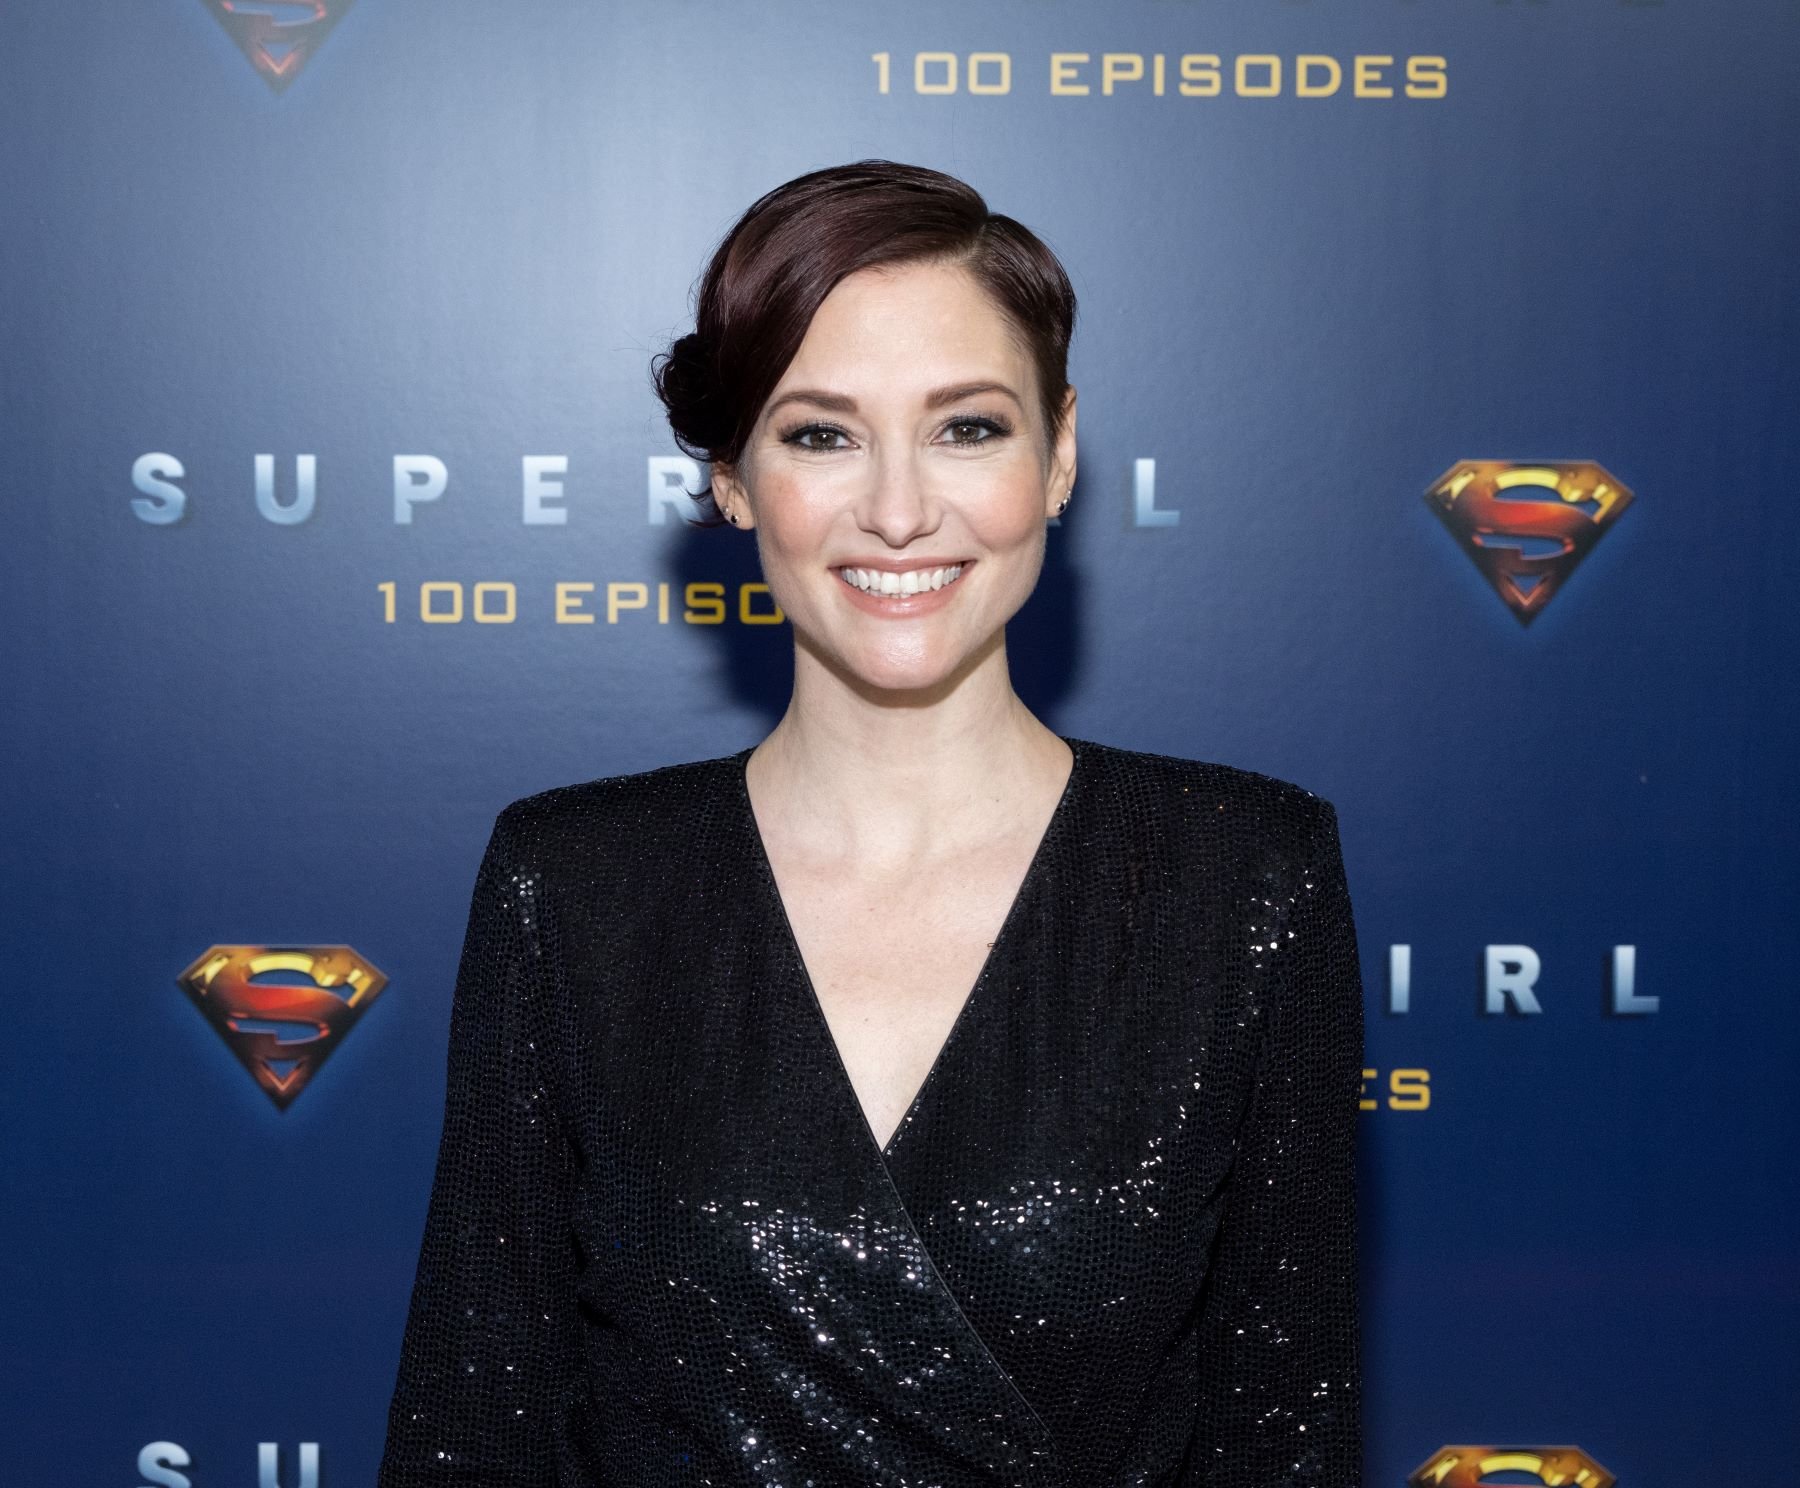 'Supergirl' actor Chyler Leigh attends the celebration of the show's 100th episode.